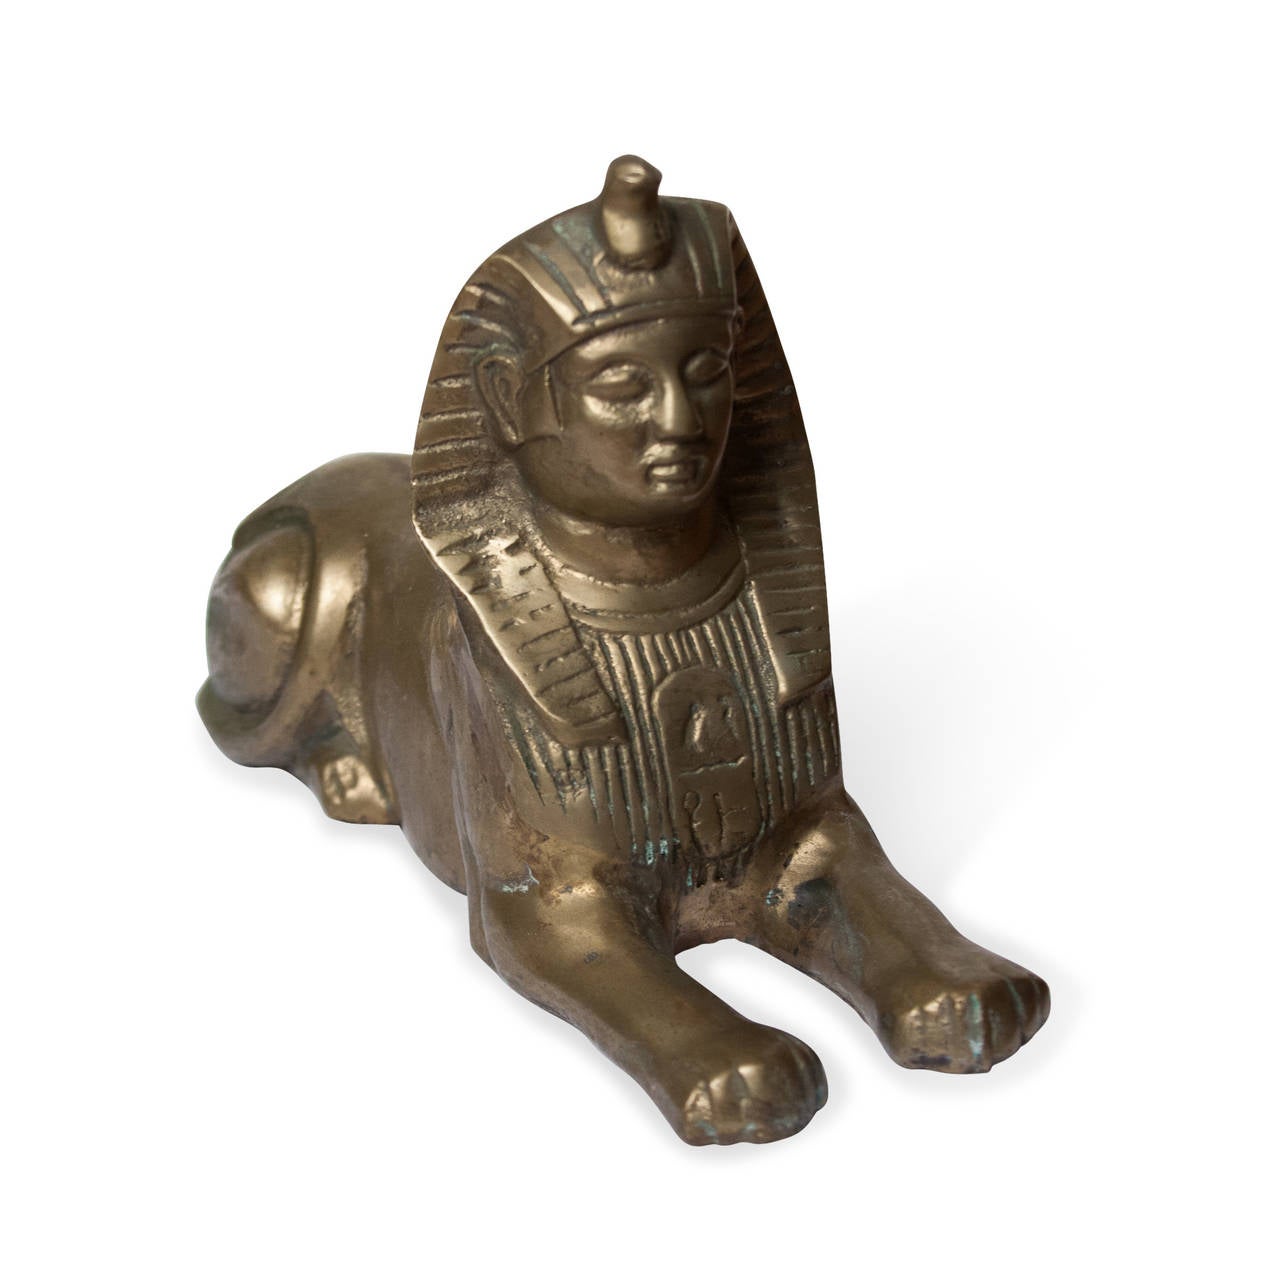 Brass sculpture of a sphinx, American, 1960s. Length 9 in, width 3 in, height 5 1/2 in.

Condition: some oxidation.